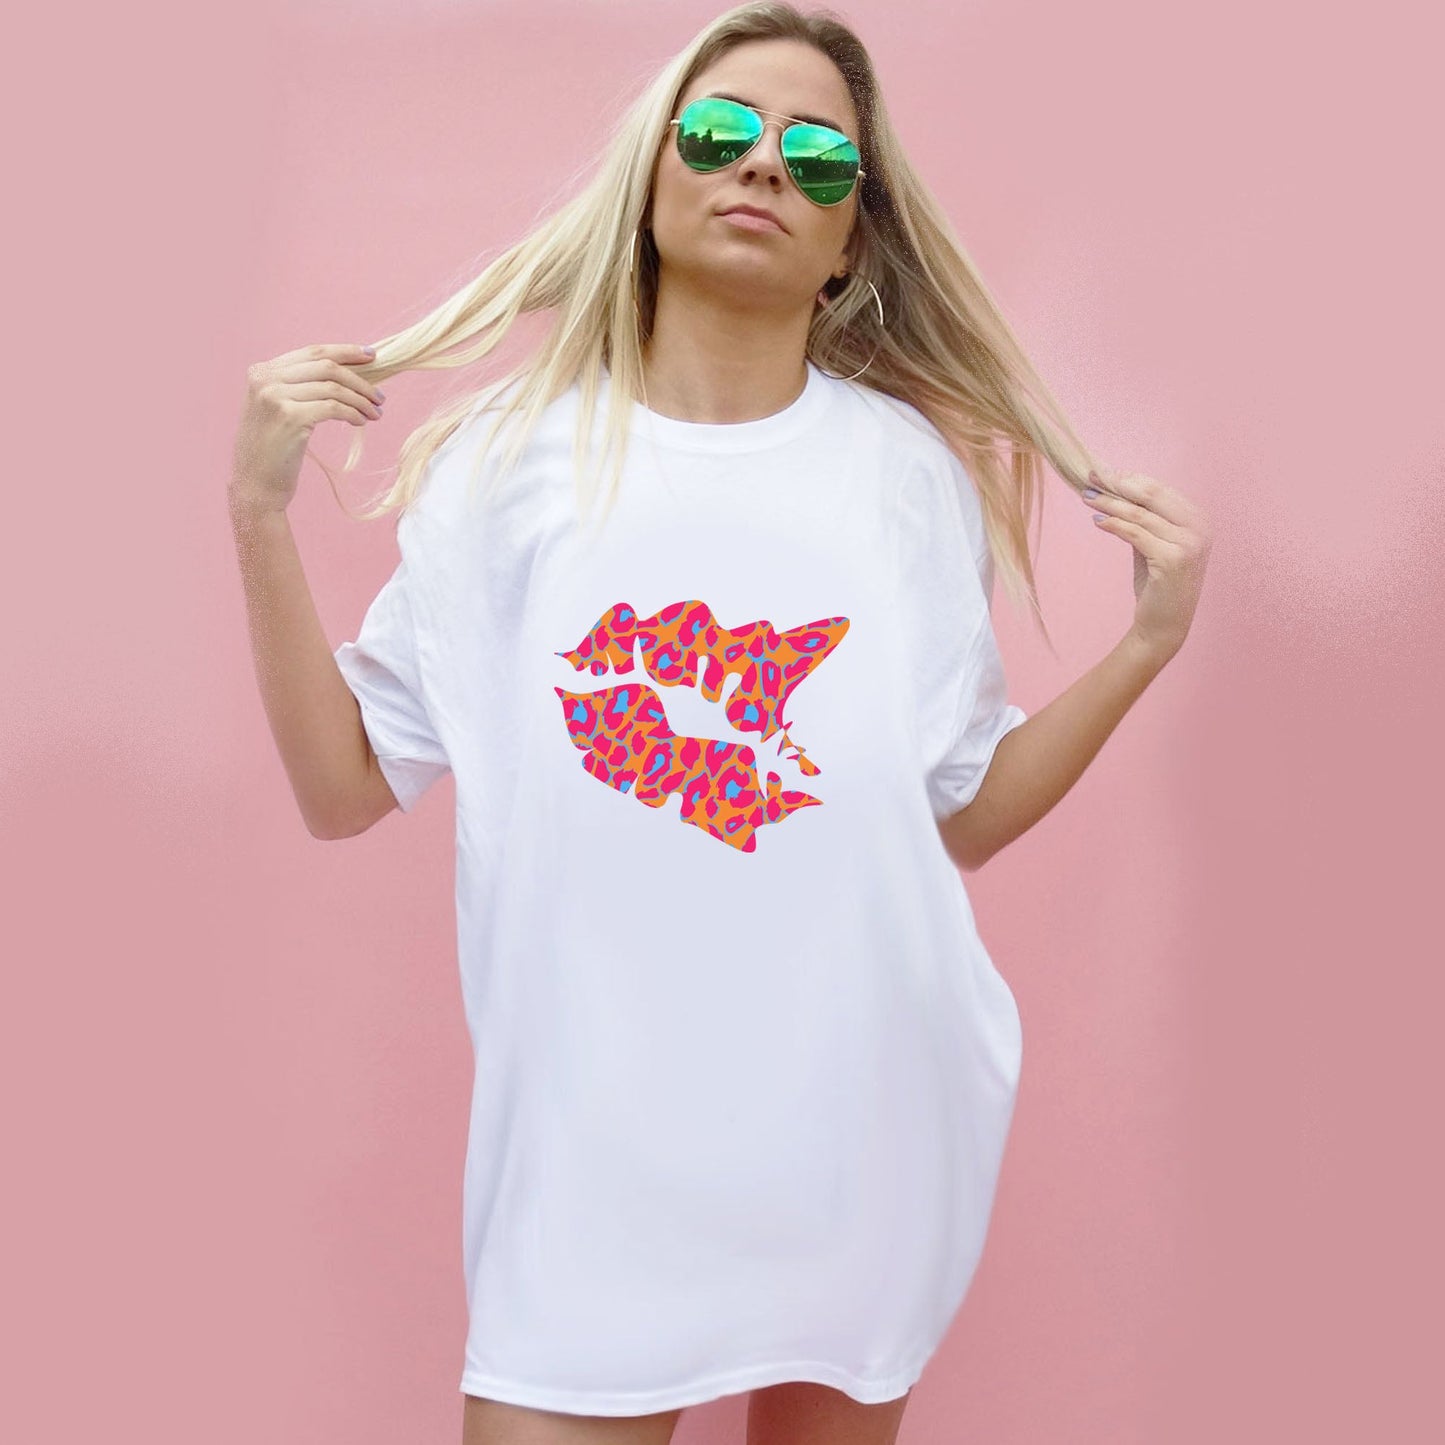 White T Shirt With Graphic Print You Know I Can Make Anything